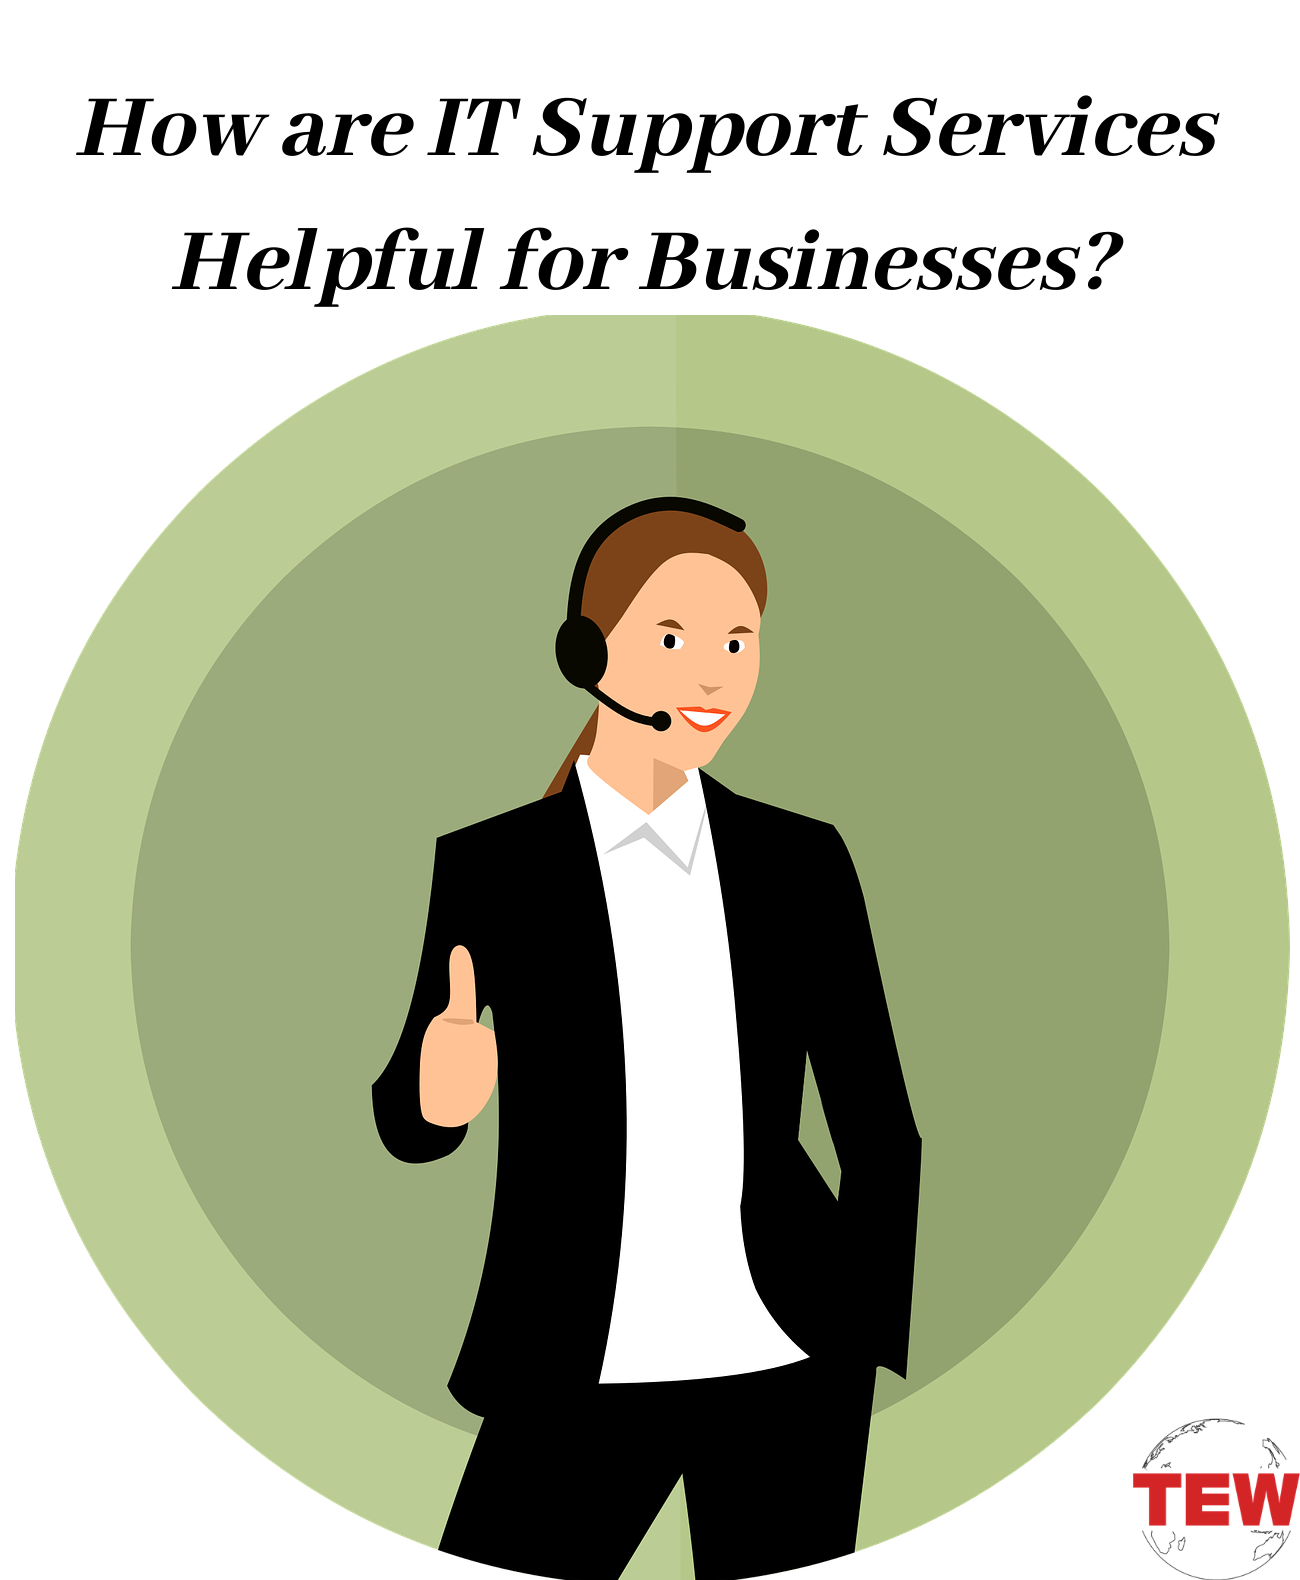 How are IT Support Services Helpful for Businesses?